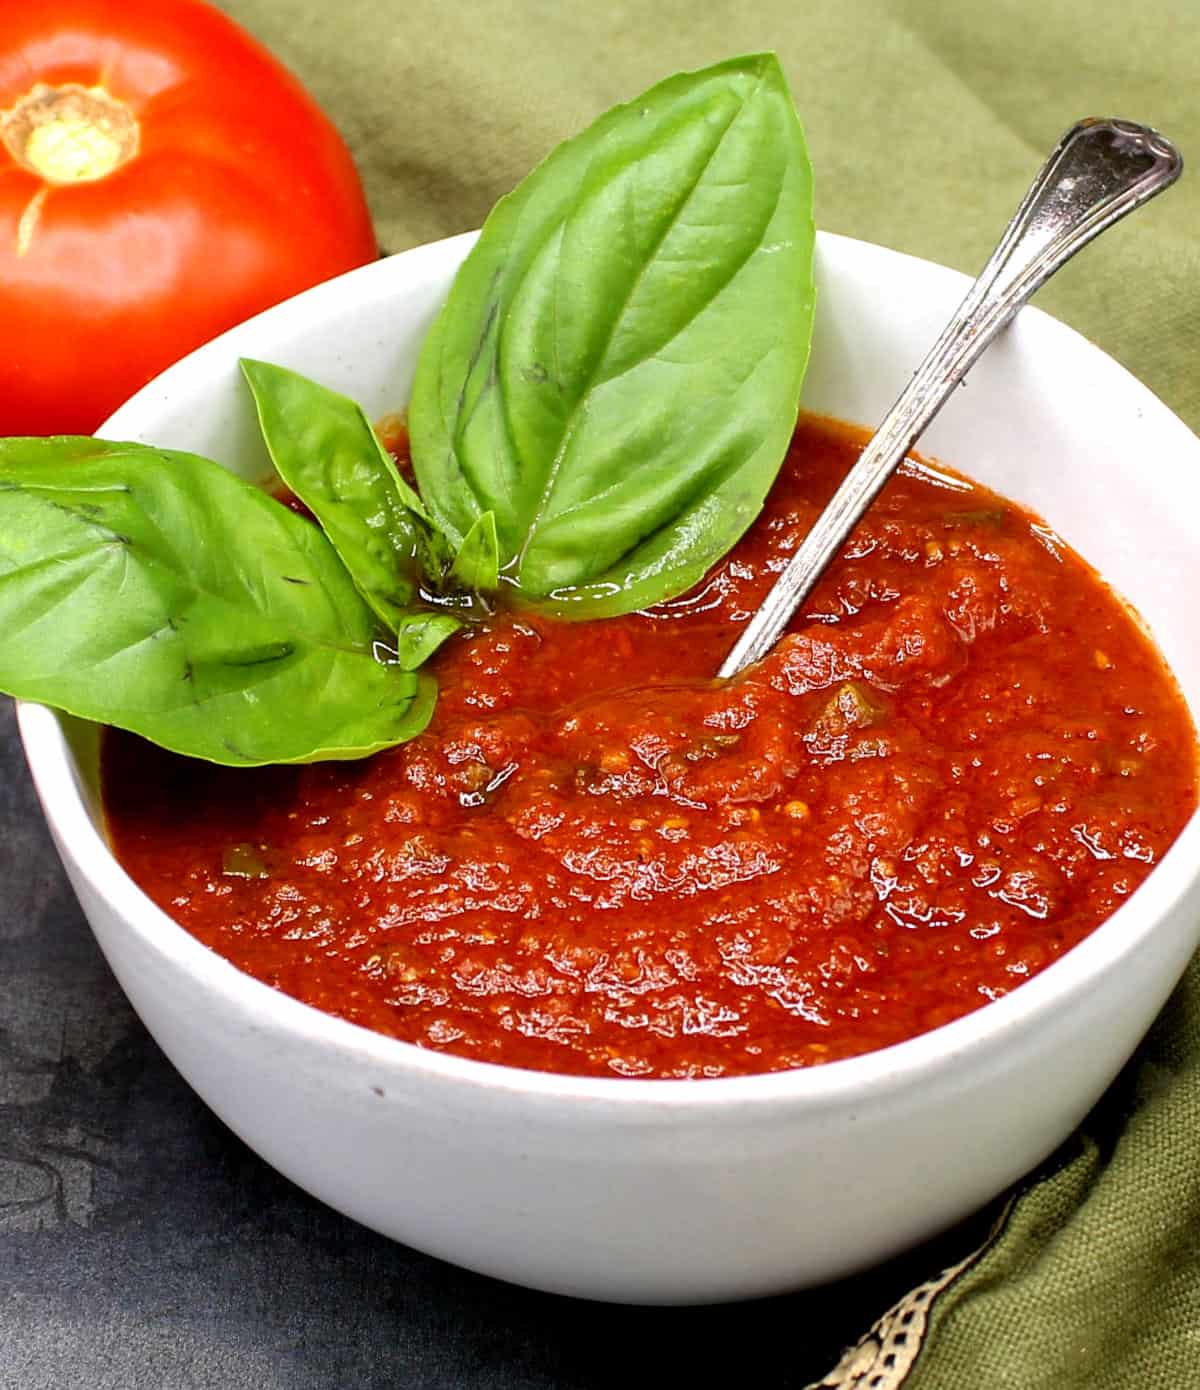 Homemade tomato sauce in bowl with a sprig of basil and a fresh tomato in background.